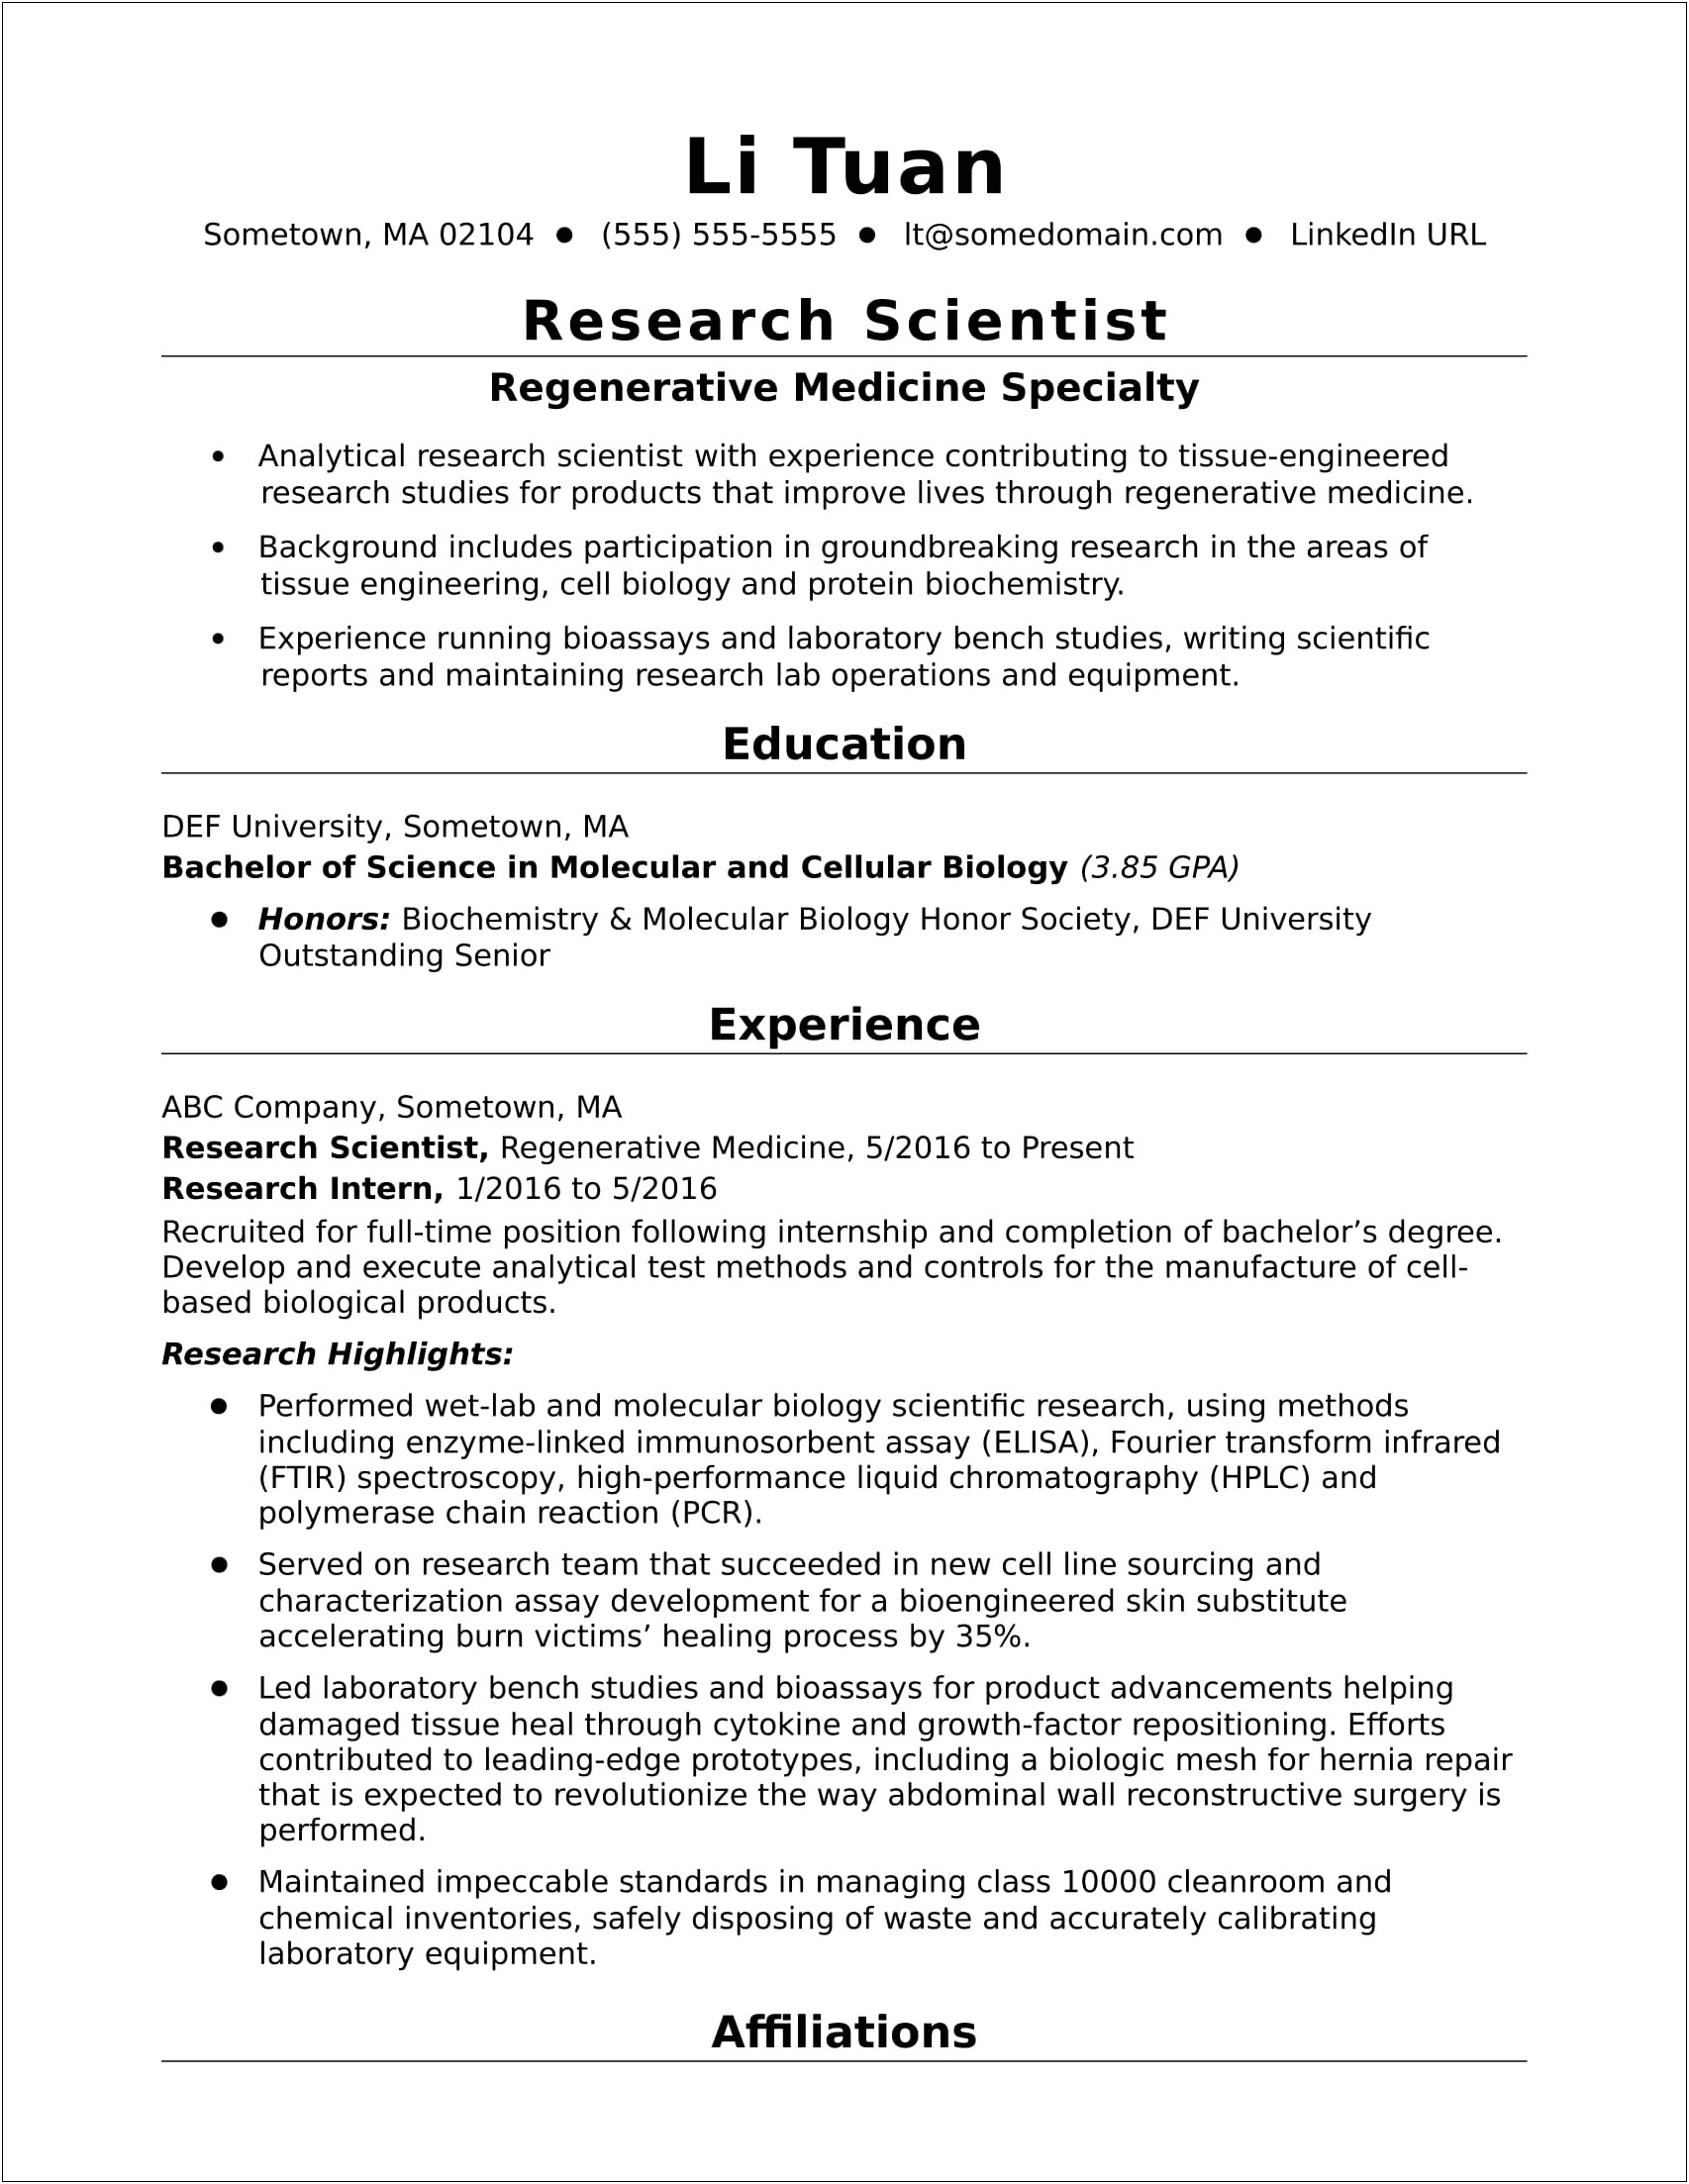 Technical Resume With Research And Experience